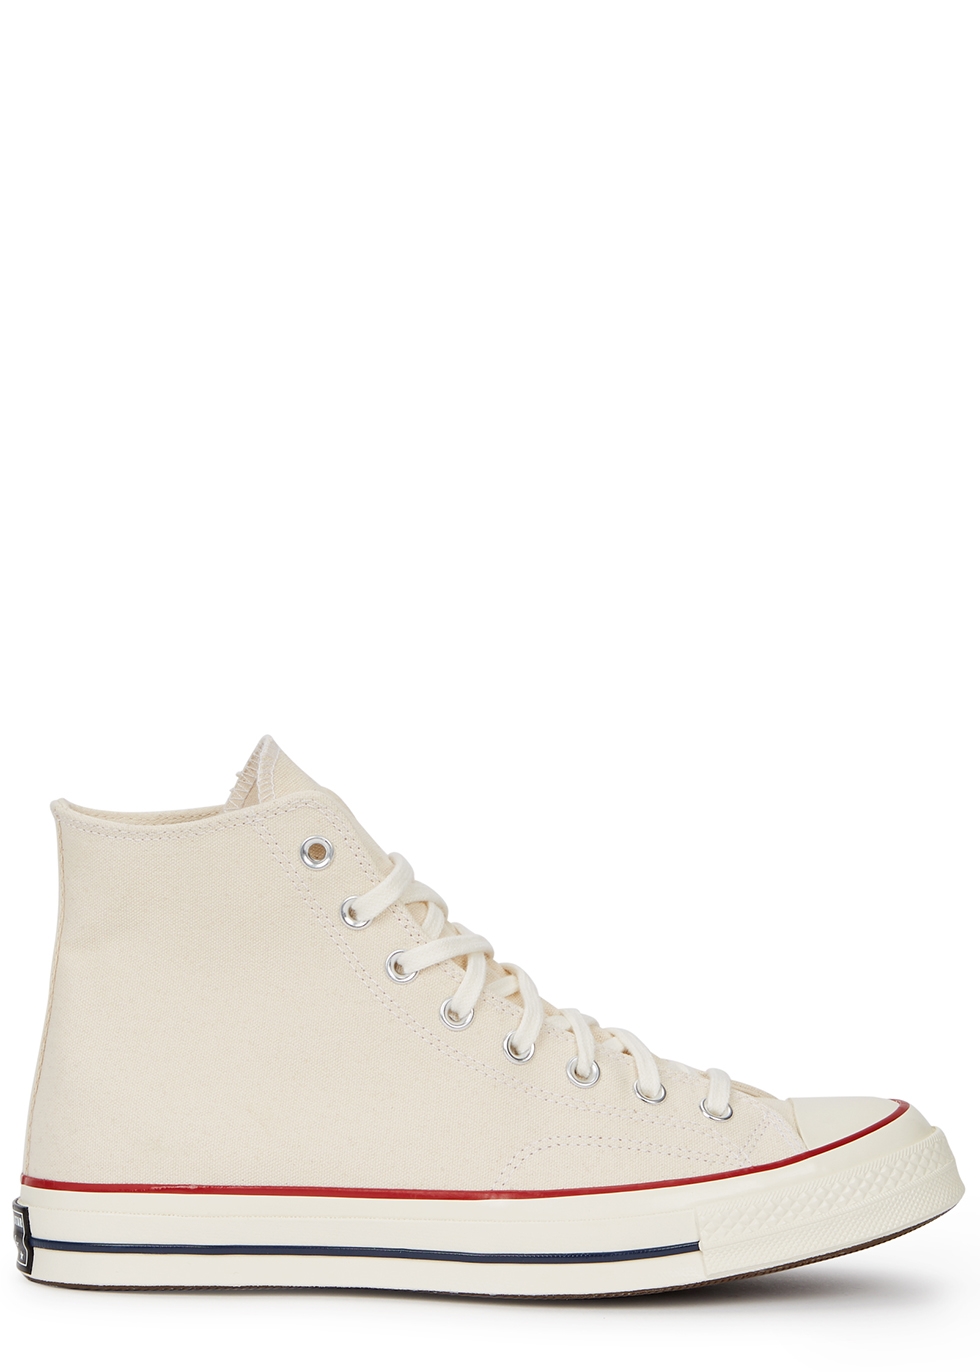 Converse Chuck 70 ivory canvas sneakers 